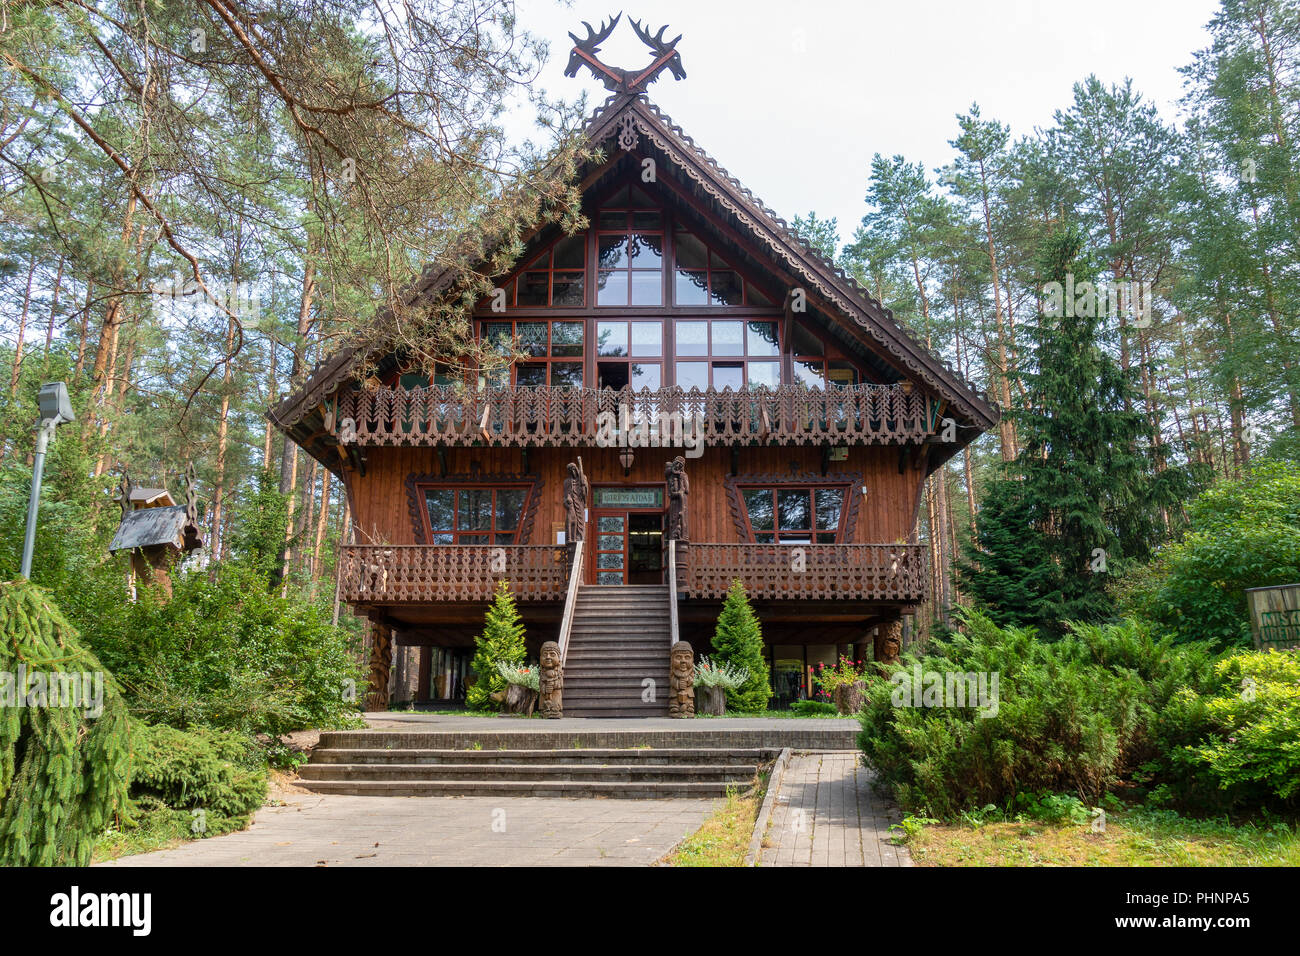 DRUSKININKAI, LITHUANIA - August 19, 2018: Museum Forest echo - Girios aidas. Druskininkai, Lithuania. The museum's expositions tell about nature of Lithuania - birds, insects, plants Stock Photo